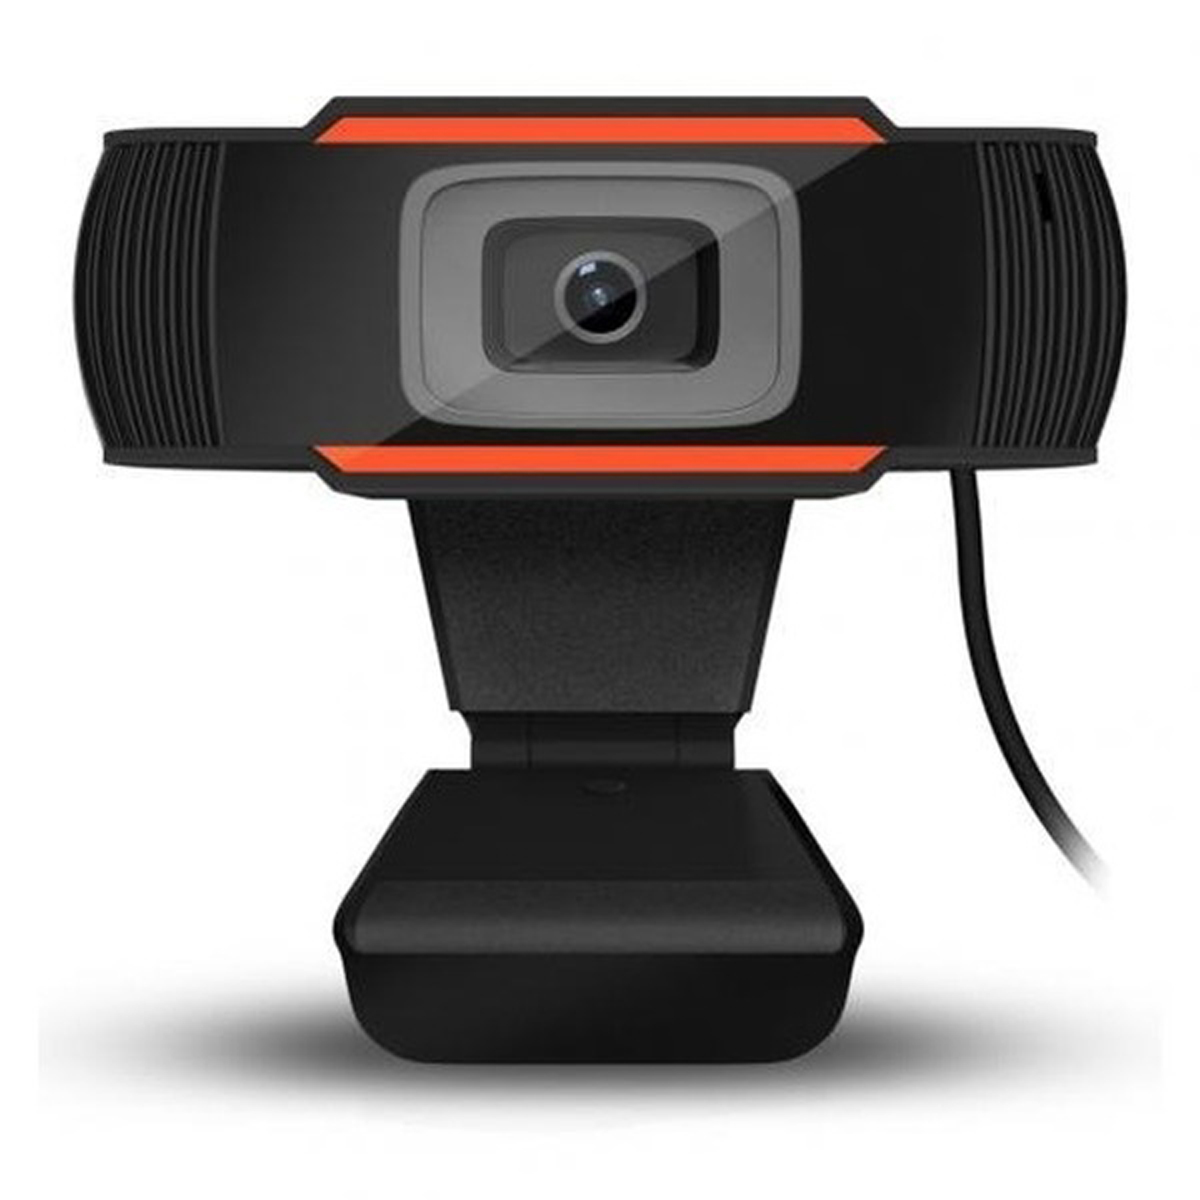 HD-Webcam-Auto-Focus-PC-Web-USB-Camera-Video-Conference-Cams-with-Microphone-1724733-8